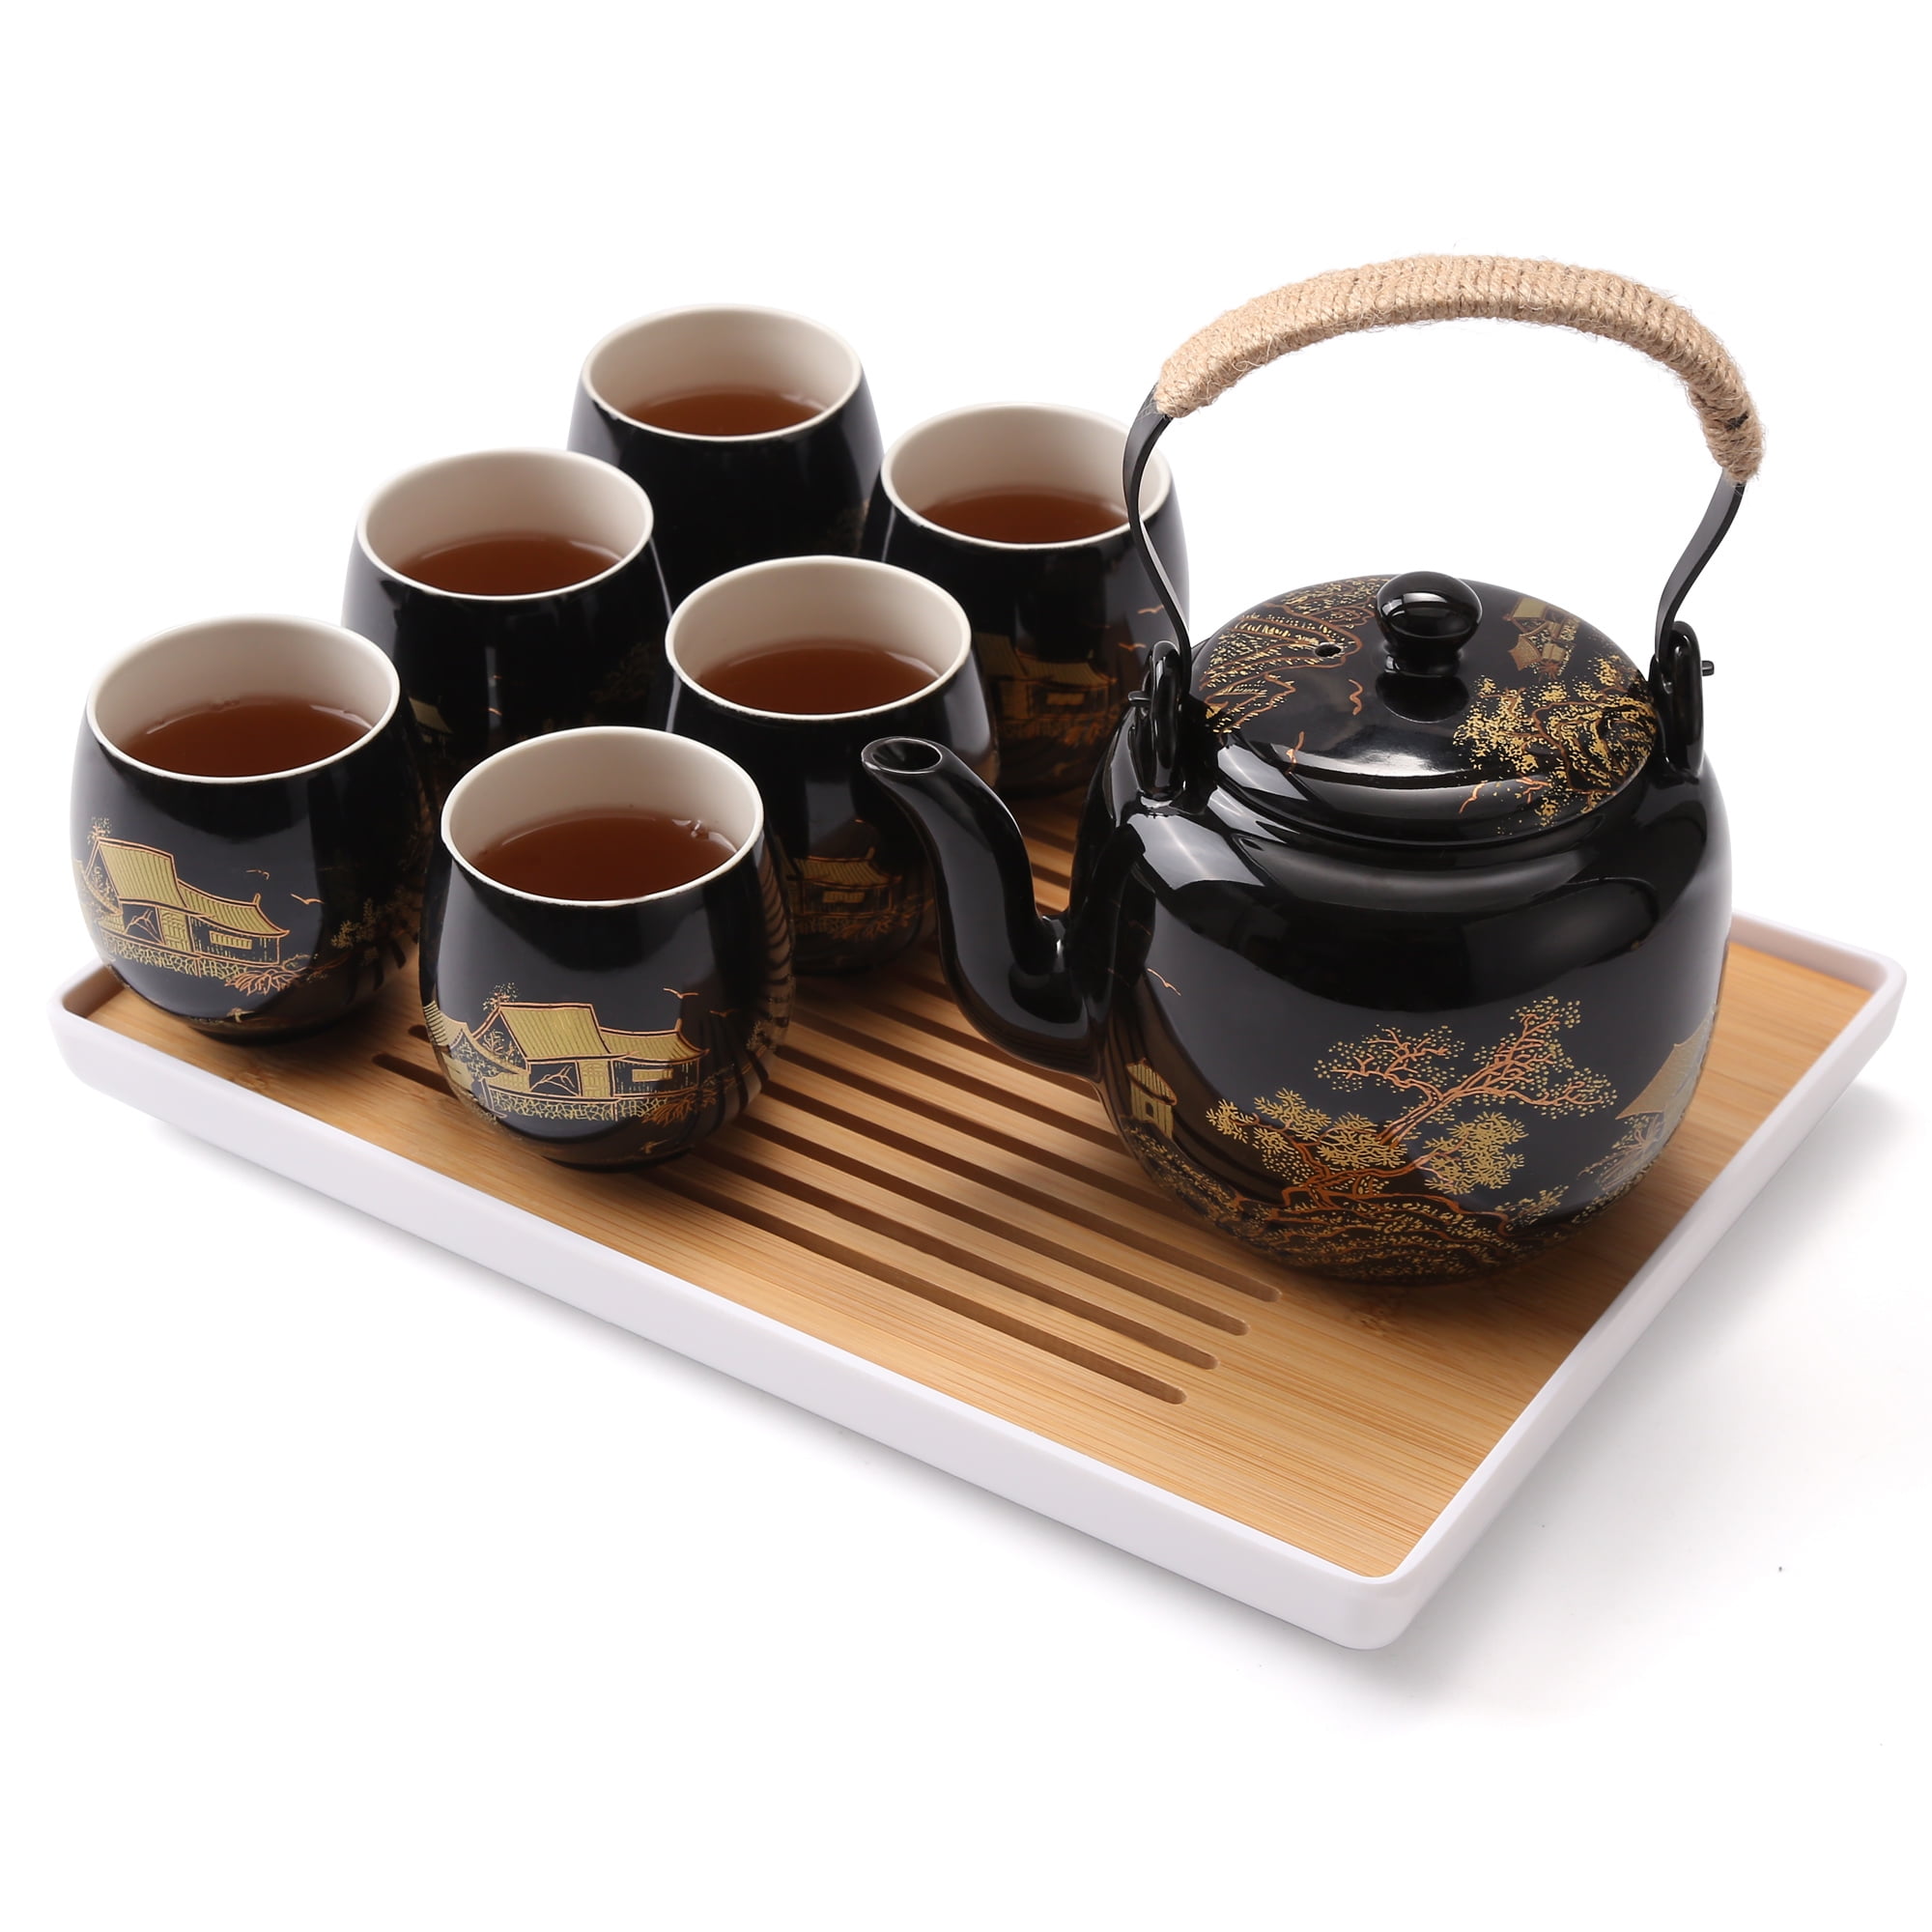 Japanese Glass Teapot With Two Styles Infuser – Umi Tea Sets